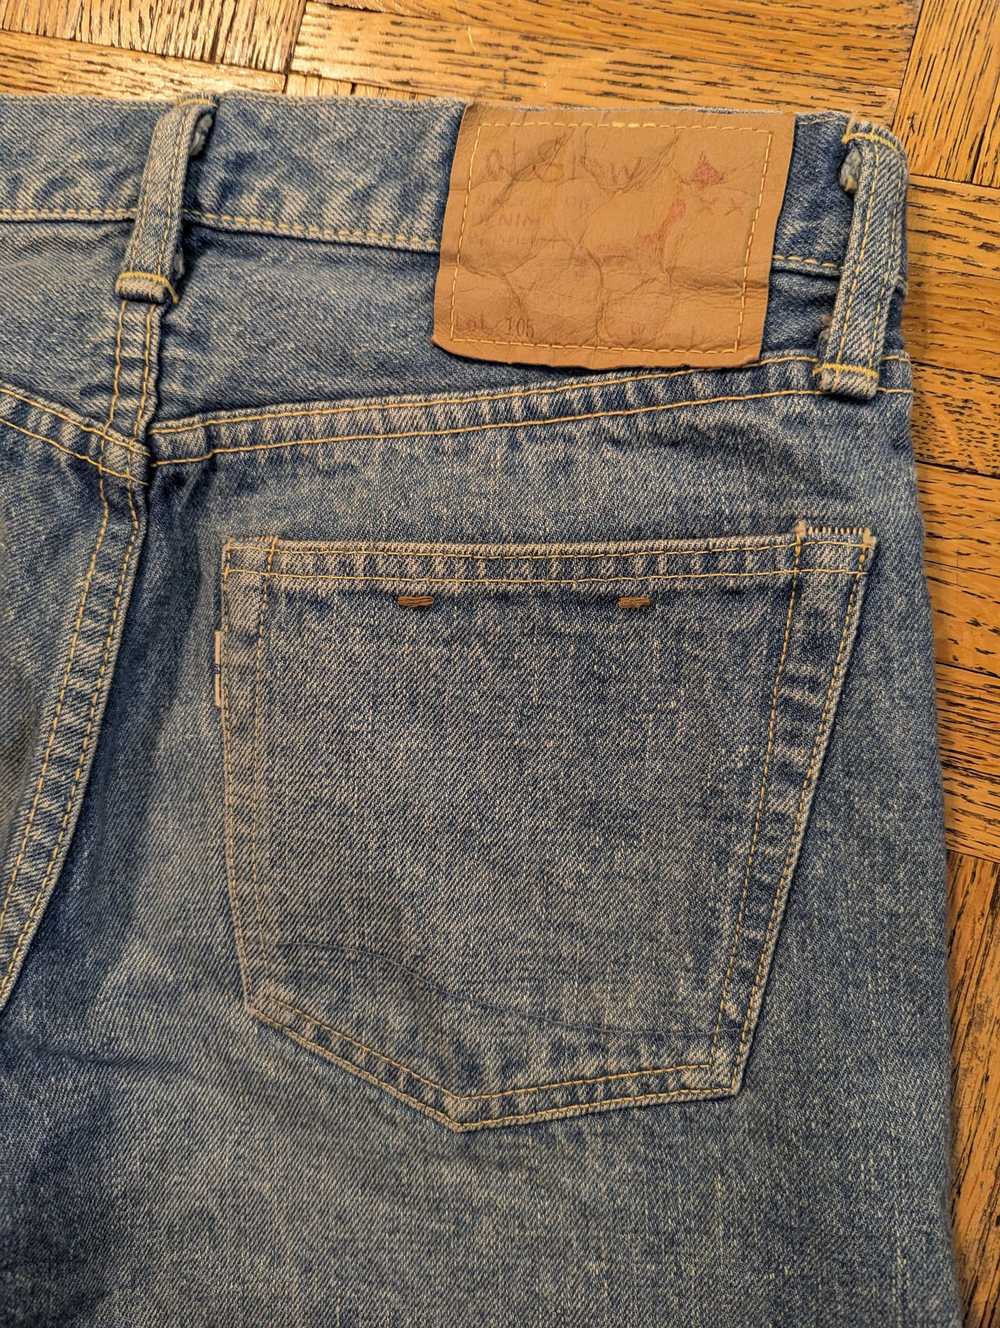 Orslow Selvedge jeans, made in Japan - image 9